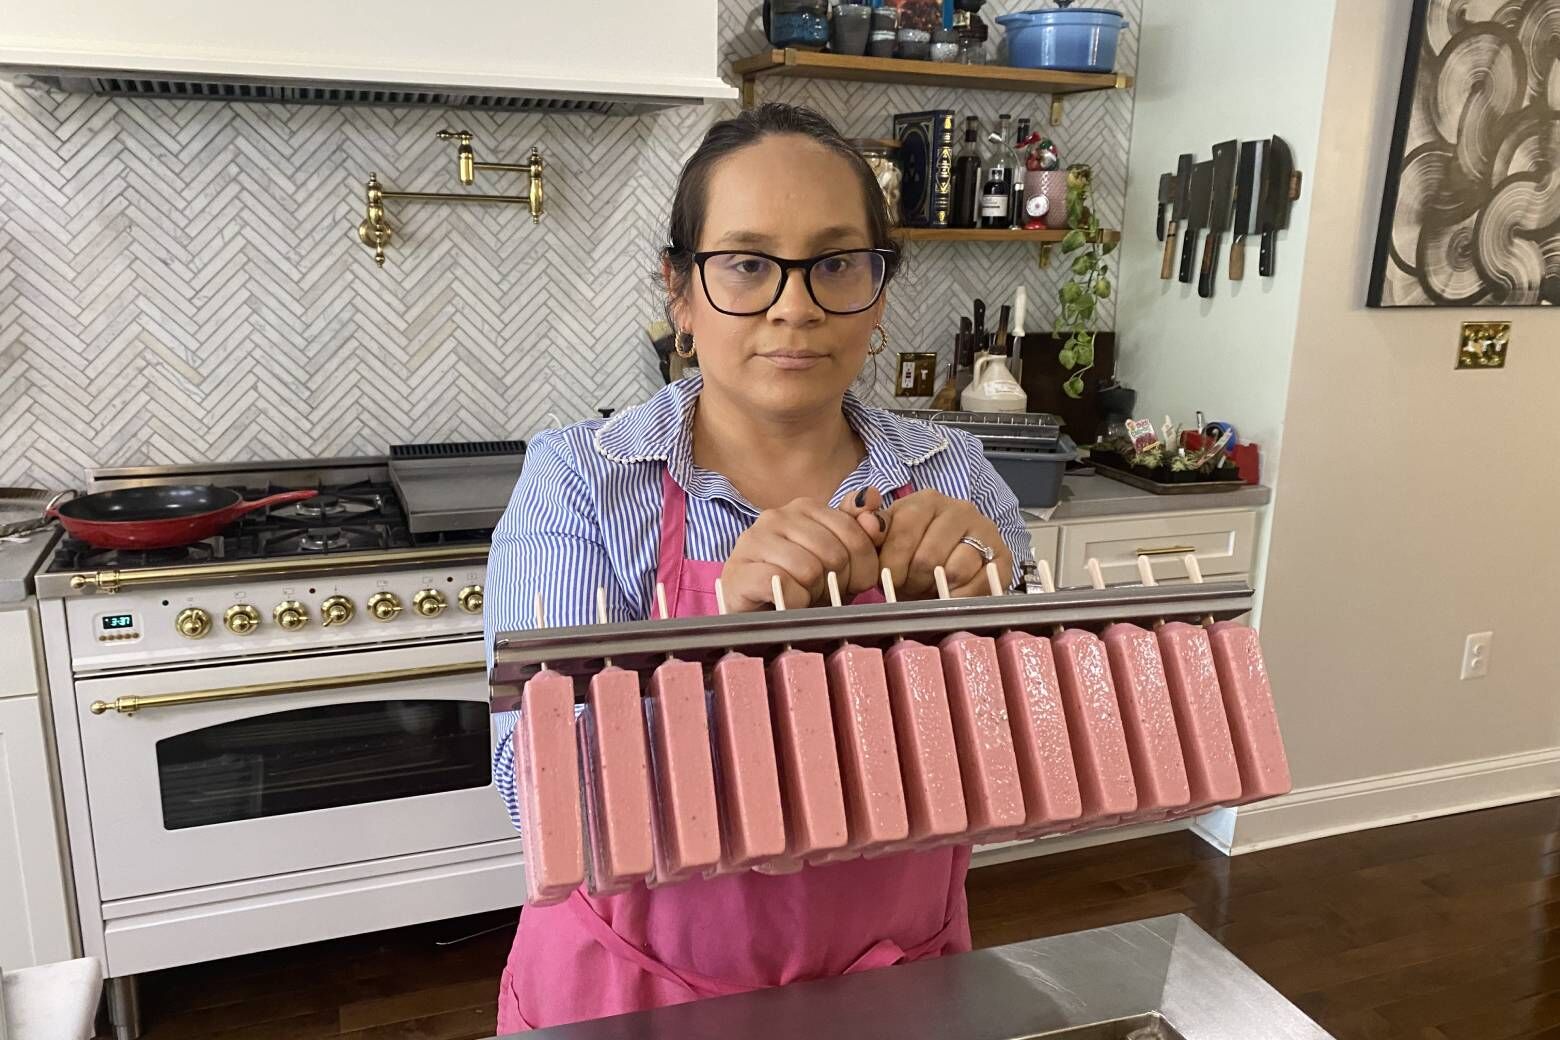 "What really differentiates the paleta from a traditional popsicle is the craftsmanship that goes into making each one of our pops," Jarabe Gourmet Pops' owner Diana Rios Jasso says. (WTOP/John Domen)